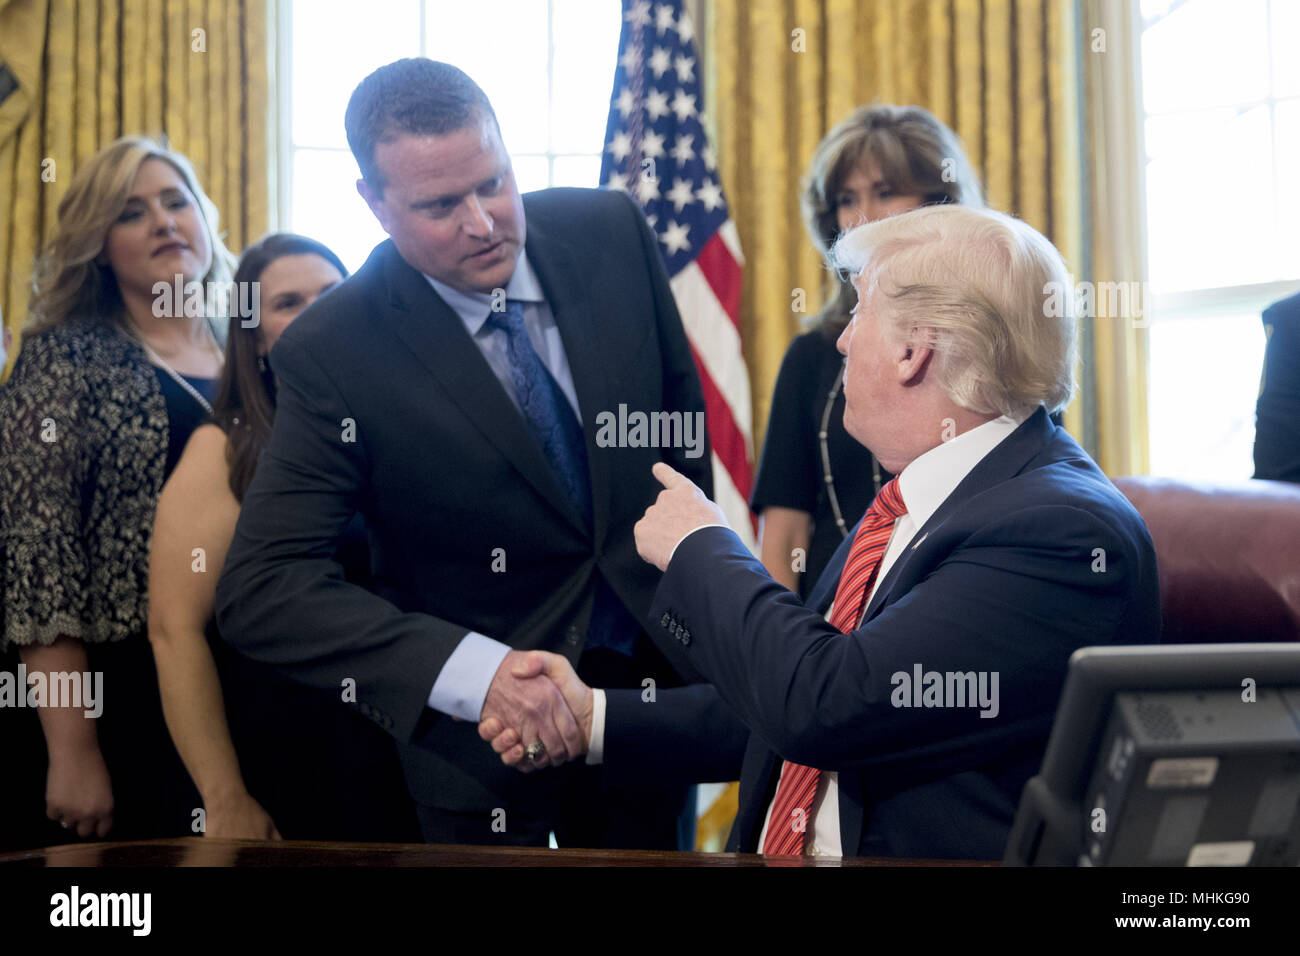 Washington, DC, USA. 1st May, 2018. United States Darren Ellisor, a Southwest Airlines Co. first officer, while meeting with the crew and passengers of Southwest Airlines flight 1380 in the Oval Office of the White House in Washington, DC, U.S., on Tuesday, May 1, 2018. An engine on Southwest's flight 1380, a Boeing Co. 737-700 bound for Dallas from New York's LaGuardia airport, exploded and made an emergency landing on April 17 sending shrapnel into the plane and killing a passenger seated near a window. Credit: Andrew Harrer/Pool via CNP | usage worldwide Credit: dpa/Alamy Live News Stock Photo